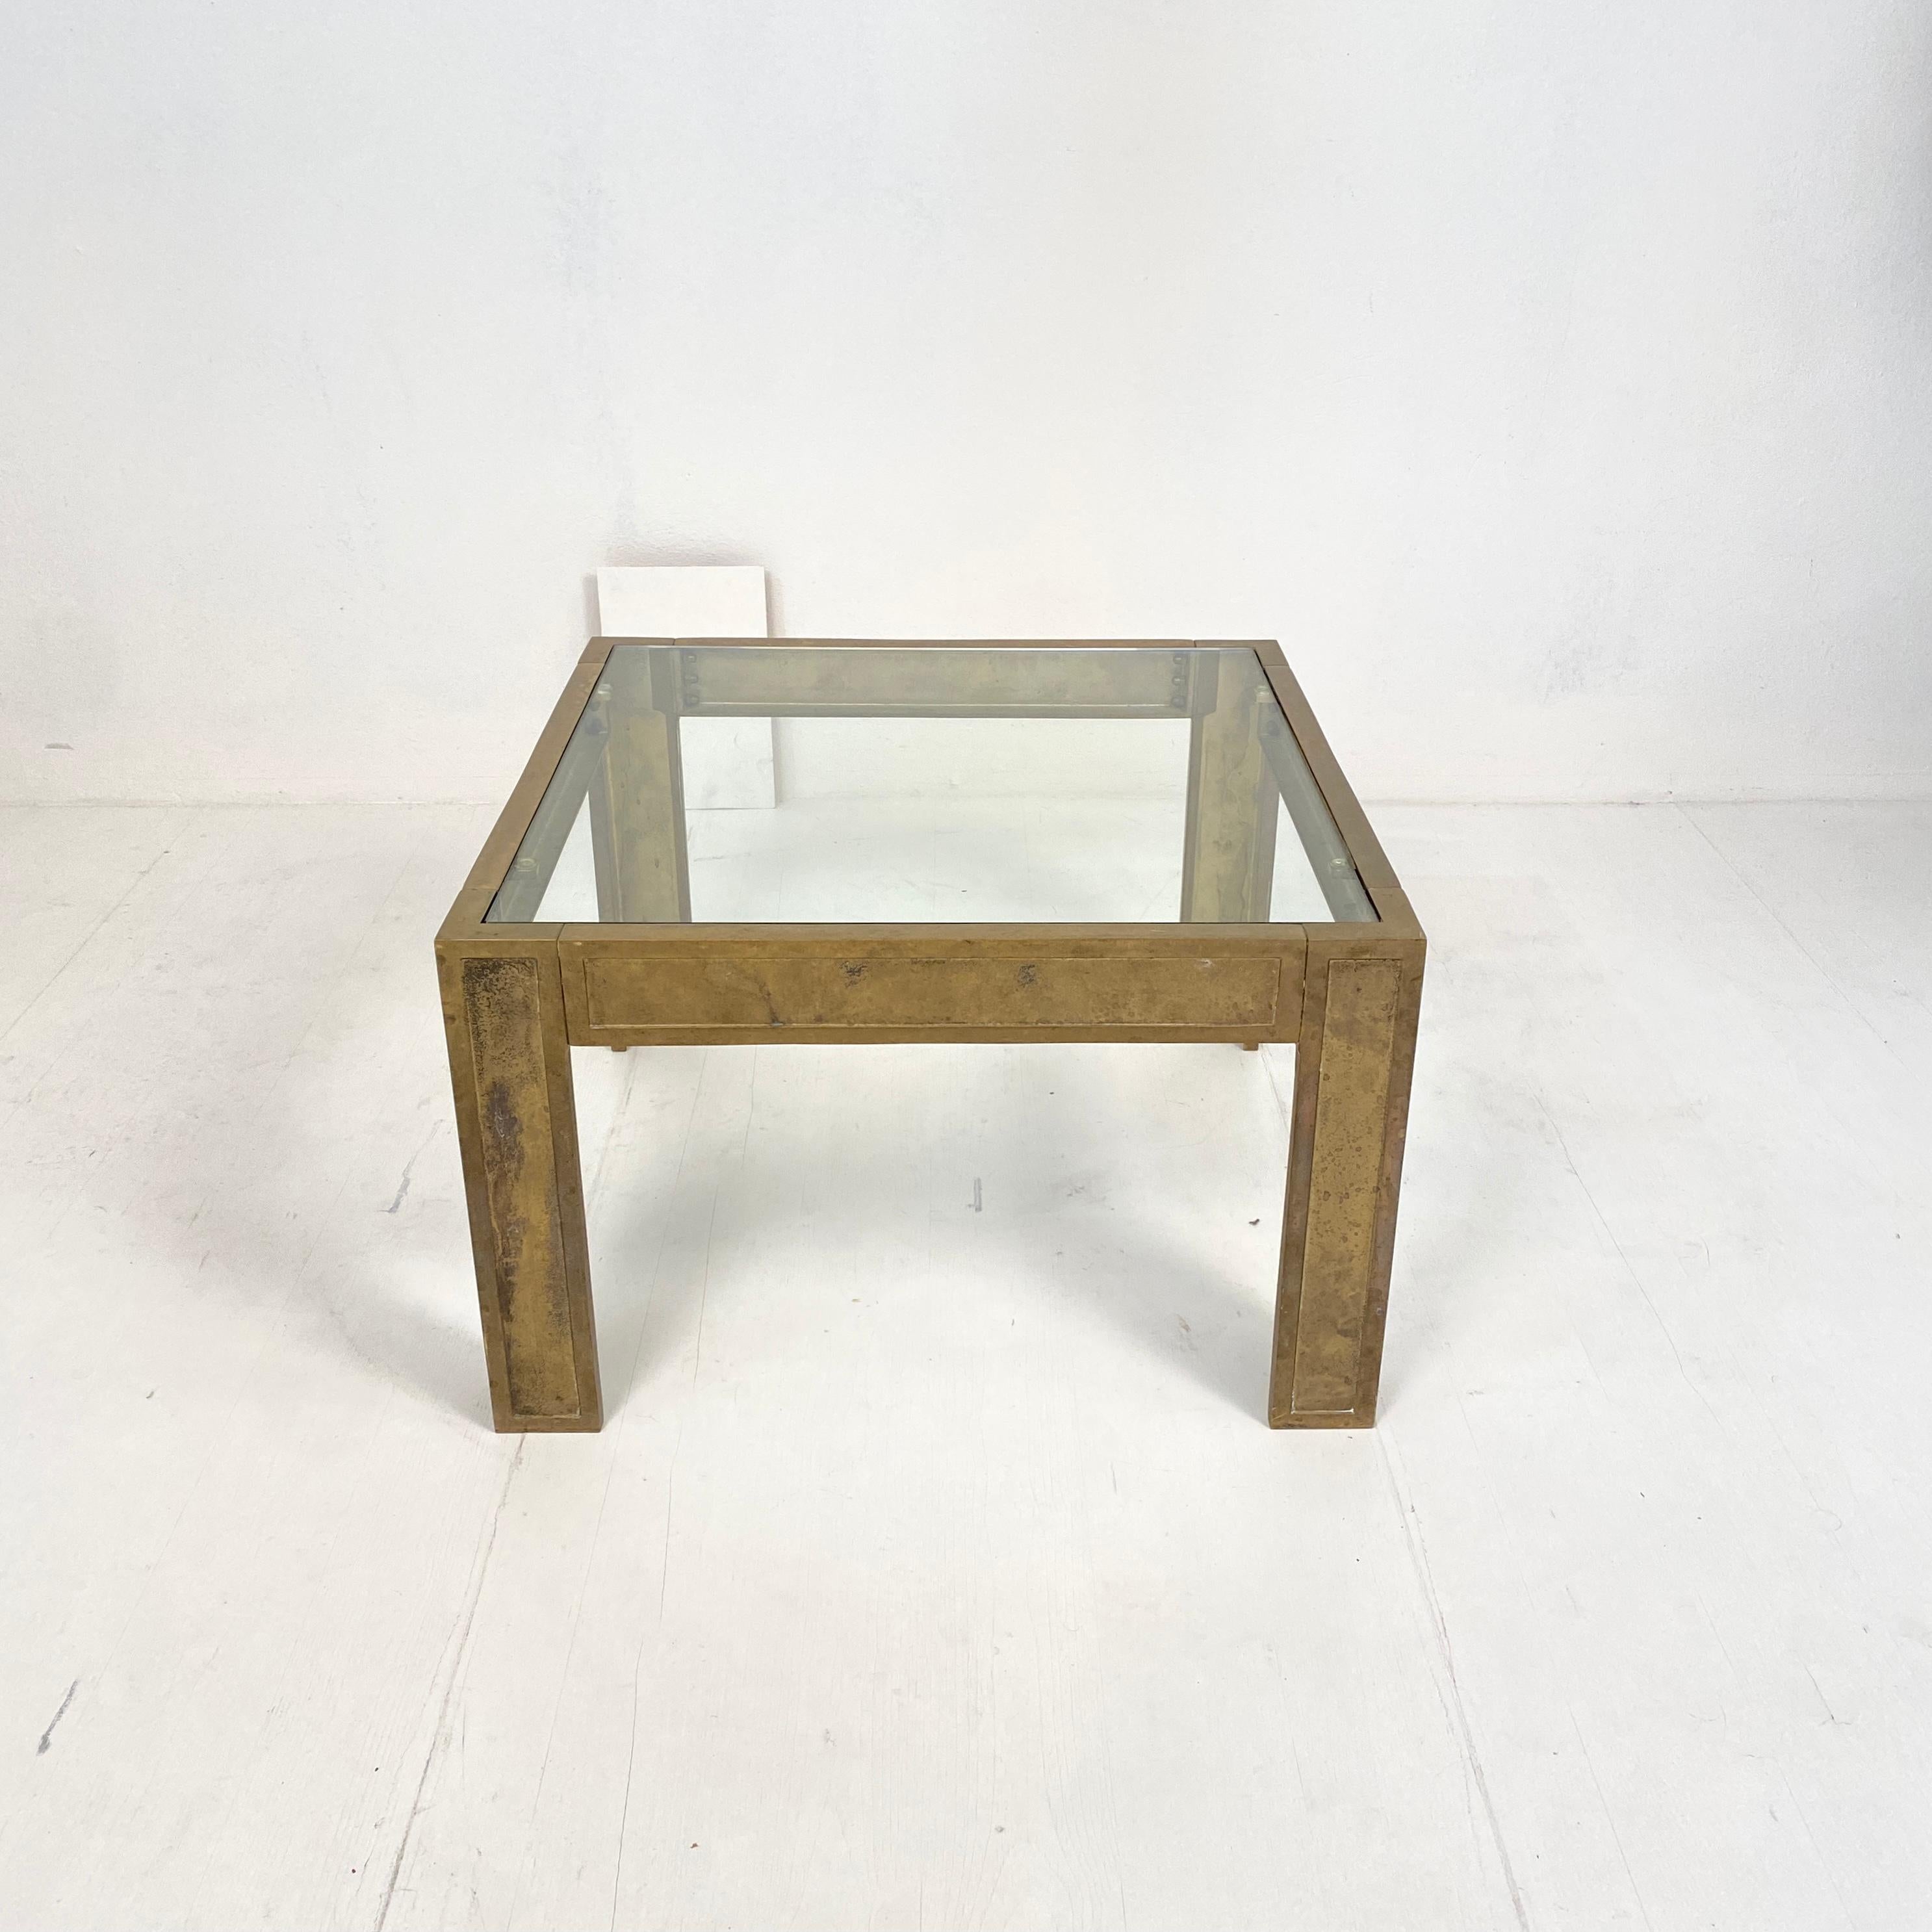 German Mid-Century Brass and Glass Sofa Table or Coffee Table by Peter Ghyczy